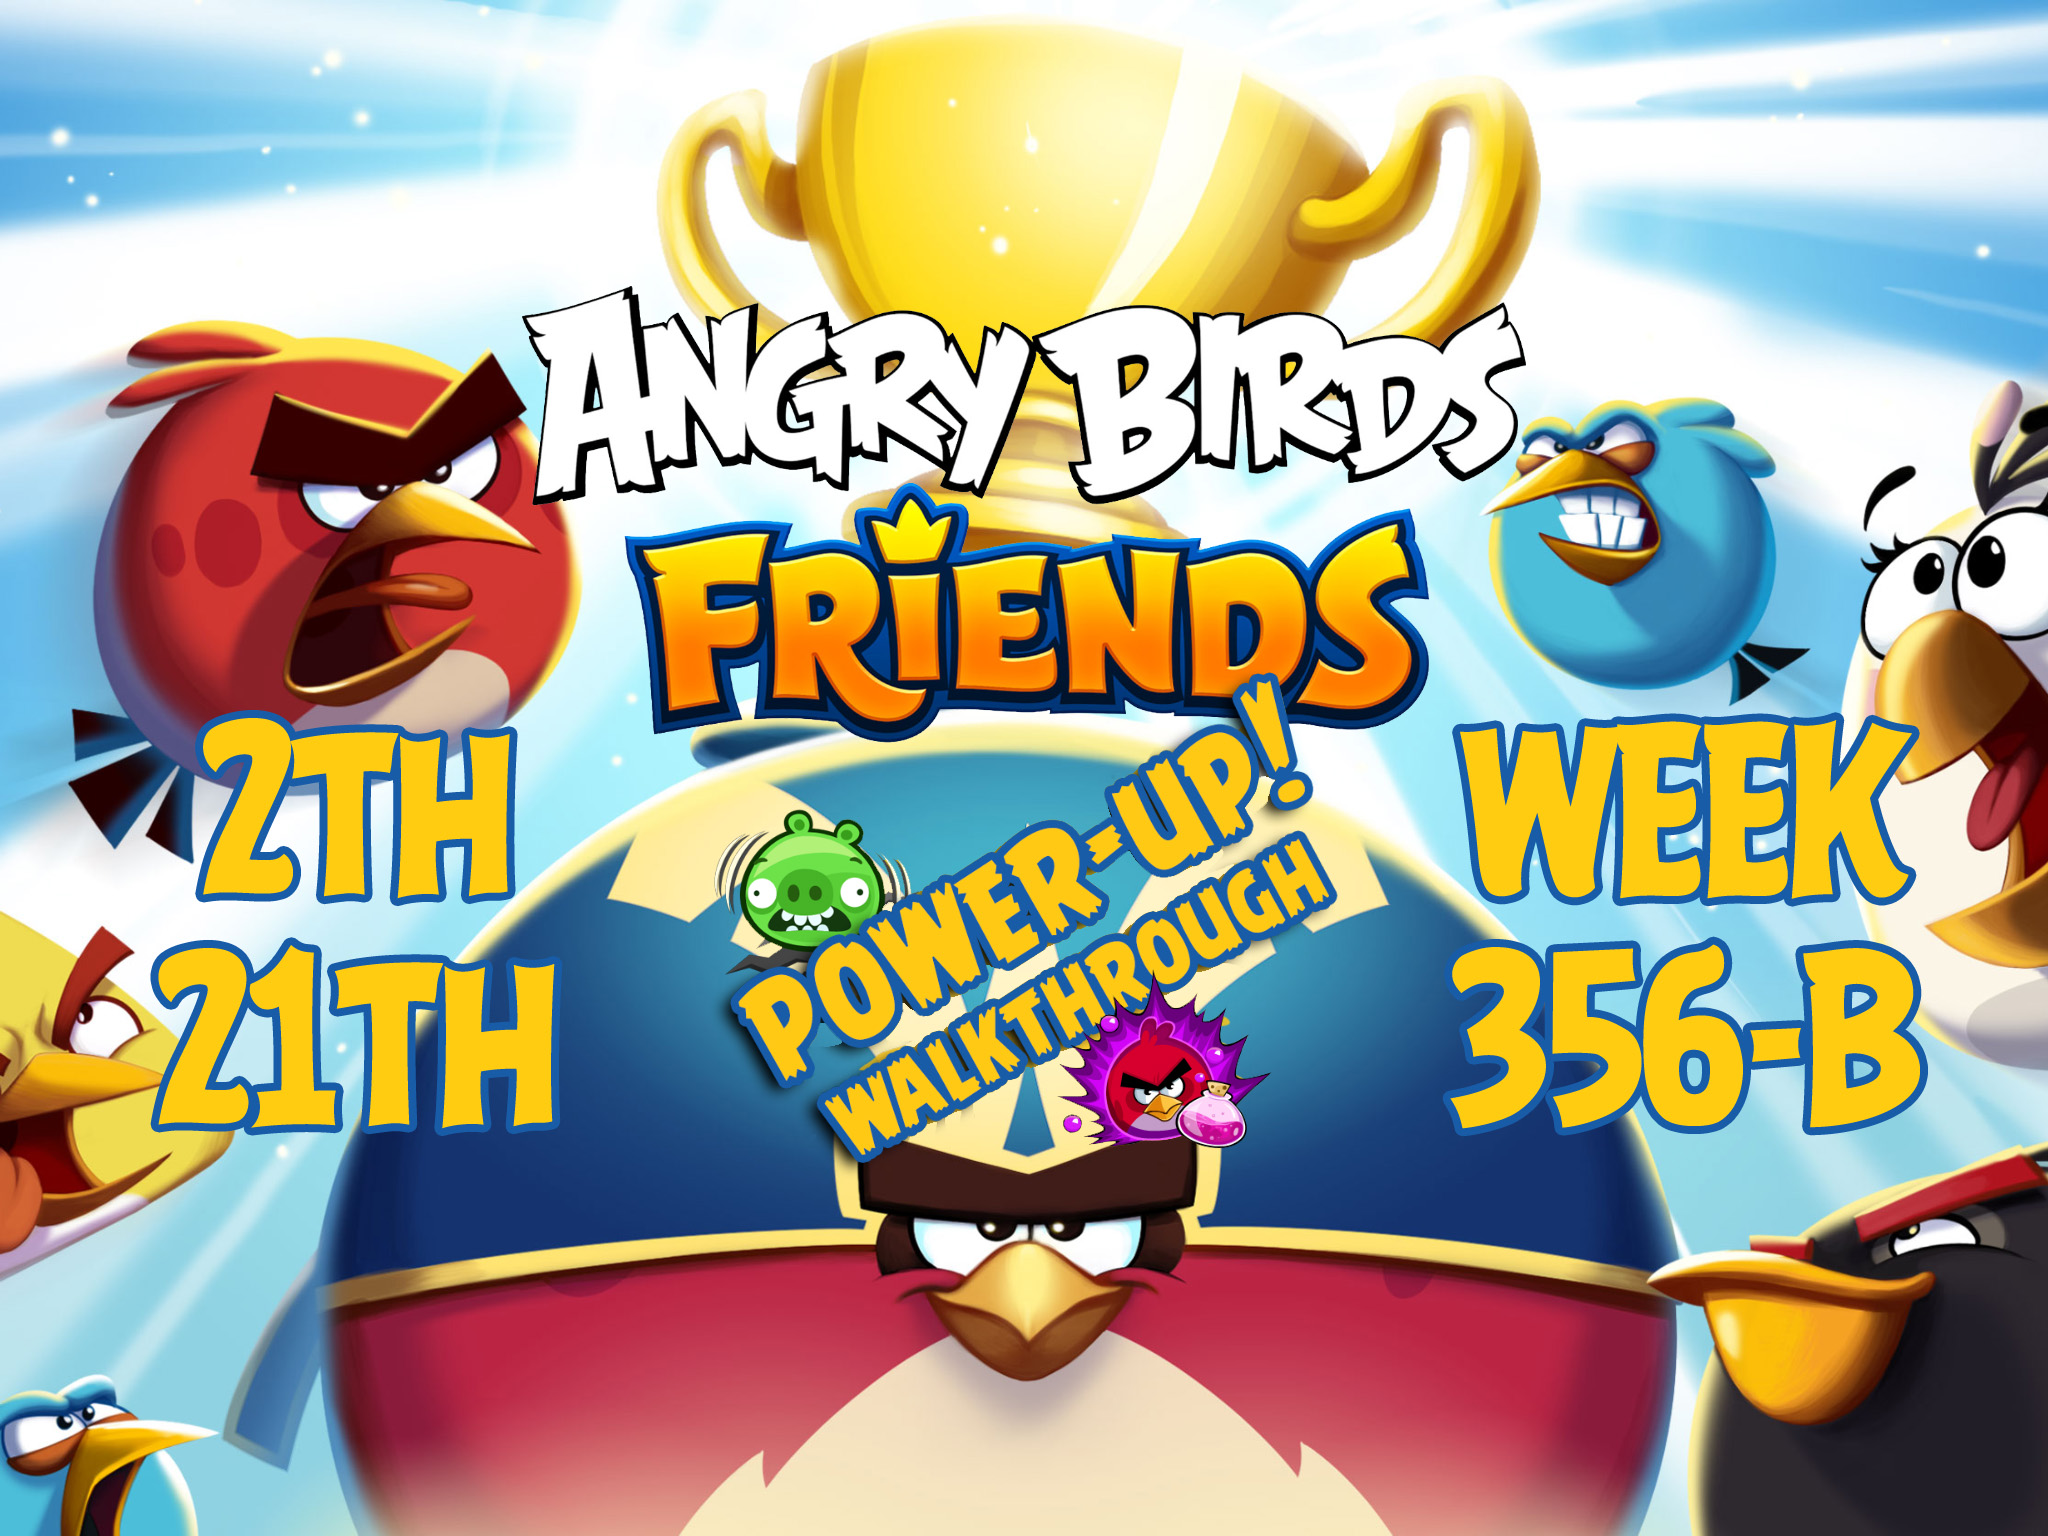 Angry-Birds-Friends-Tournament-Week-356-B-Feature-Image-PU